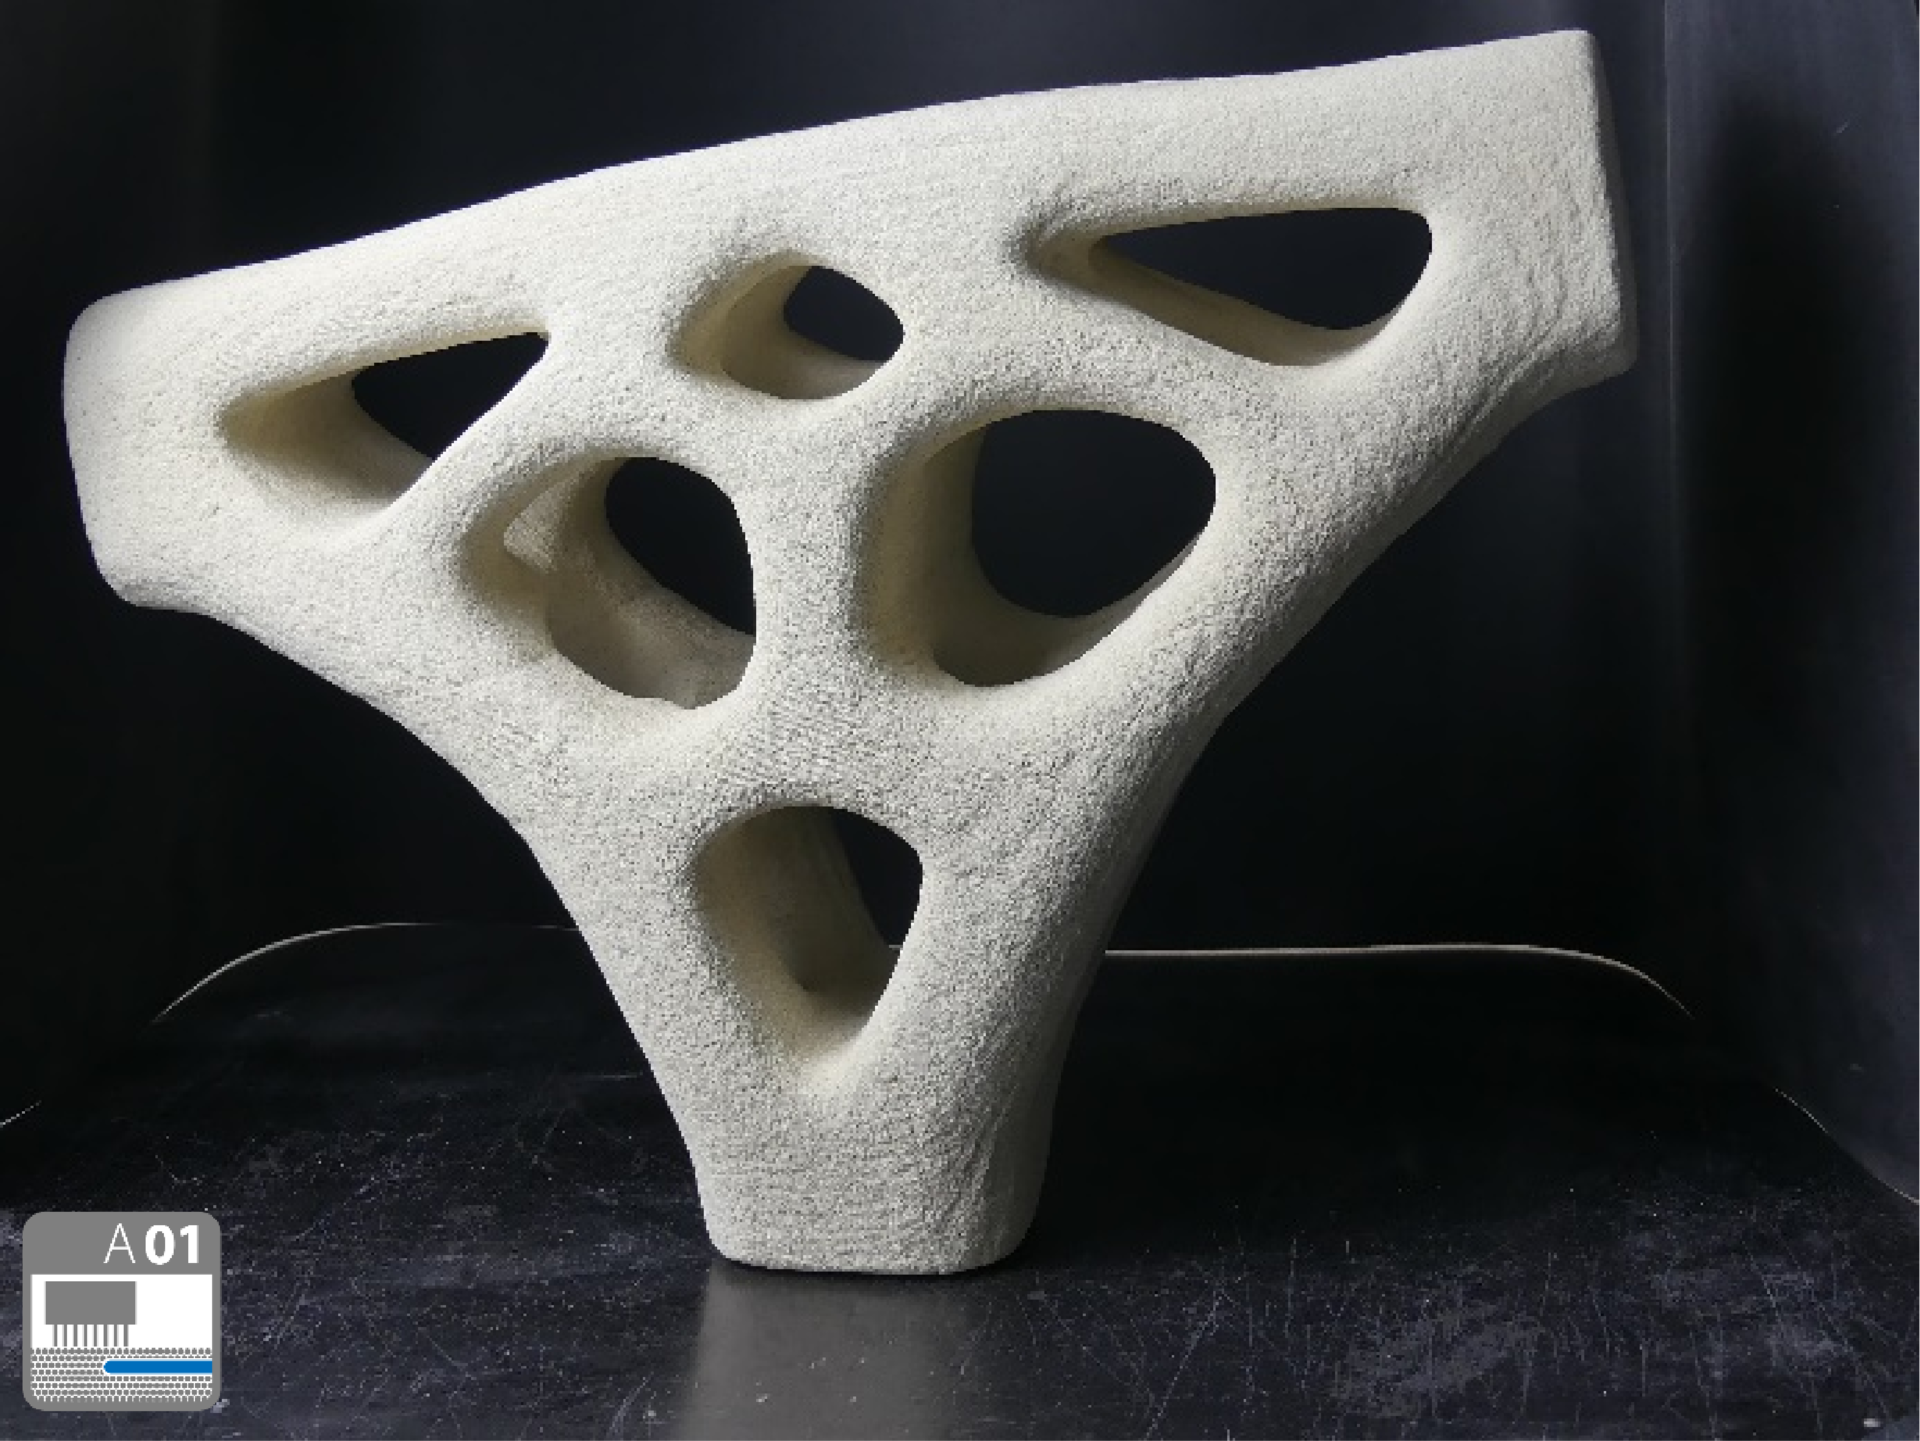 Topology optimised node 3D printed